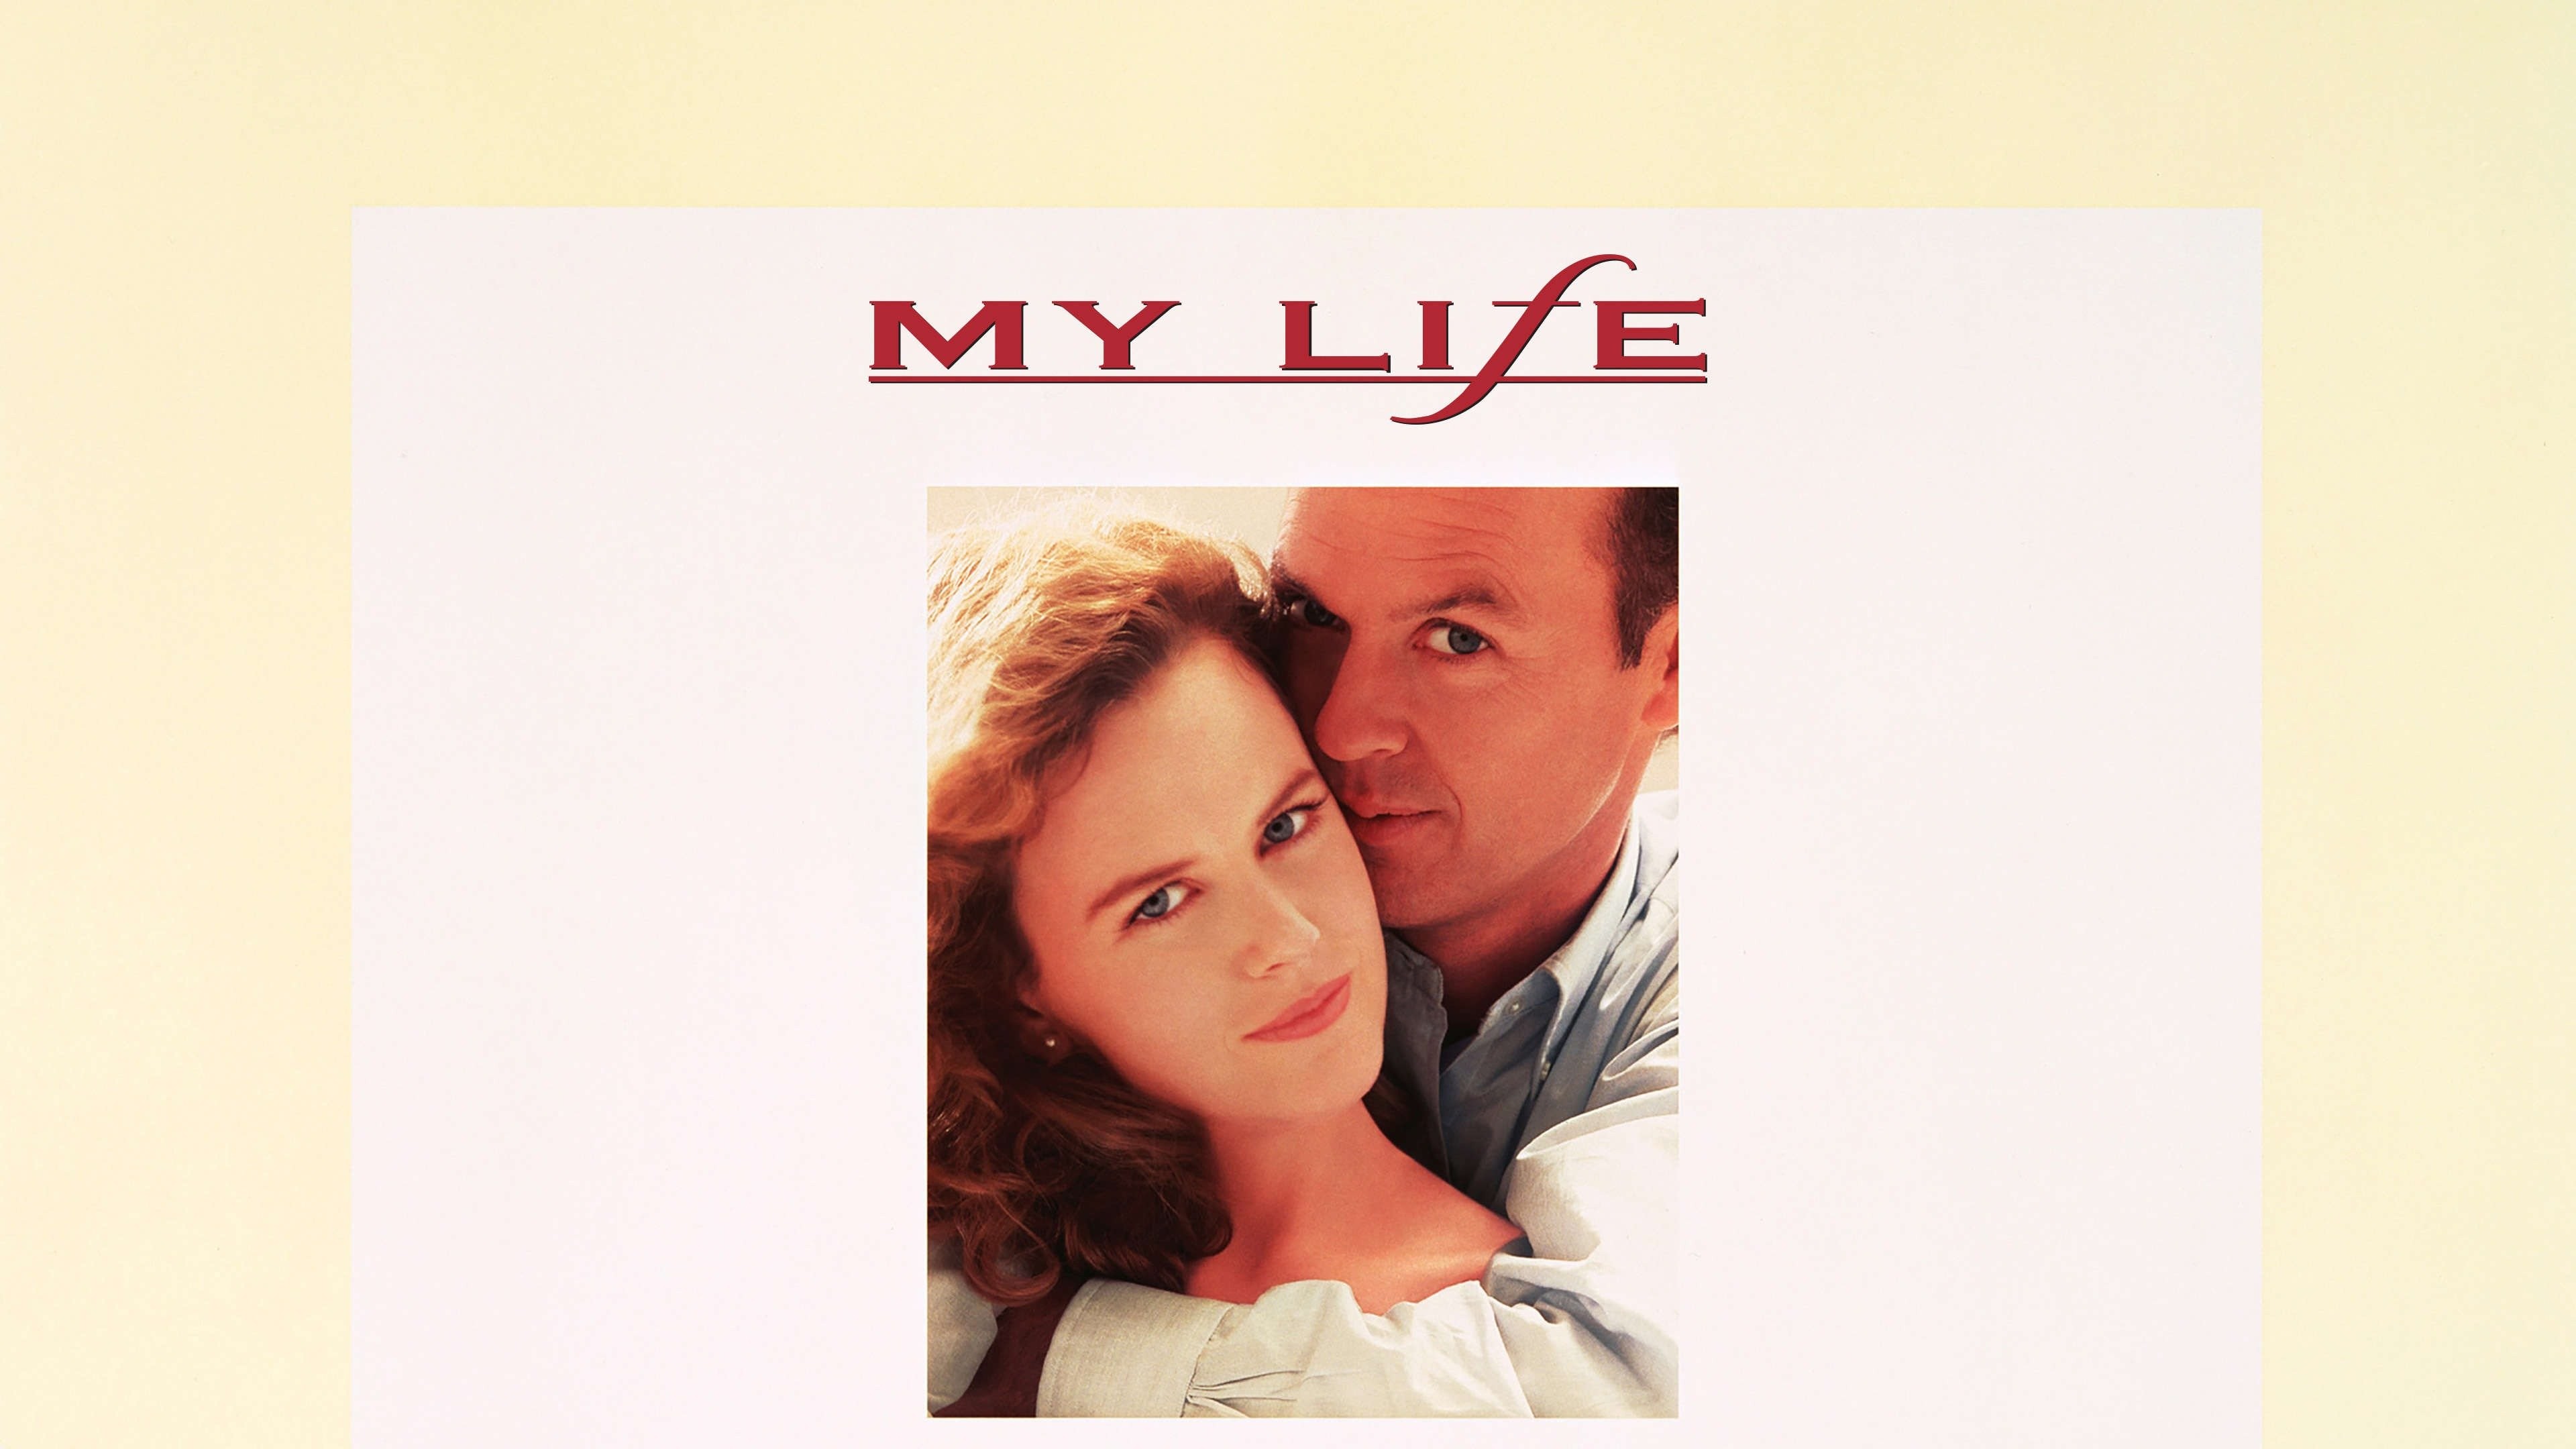 The Movie of My Life streaming: where to watch online?